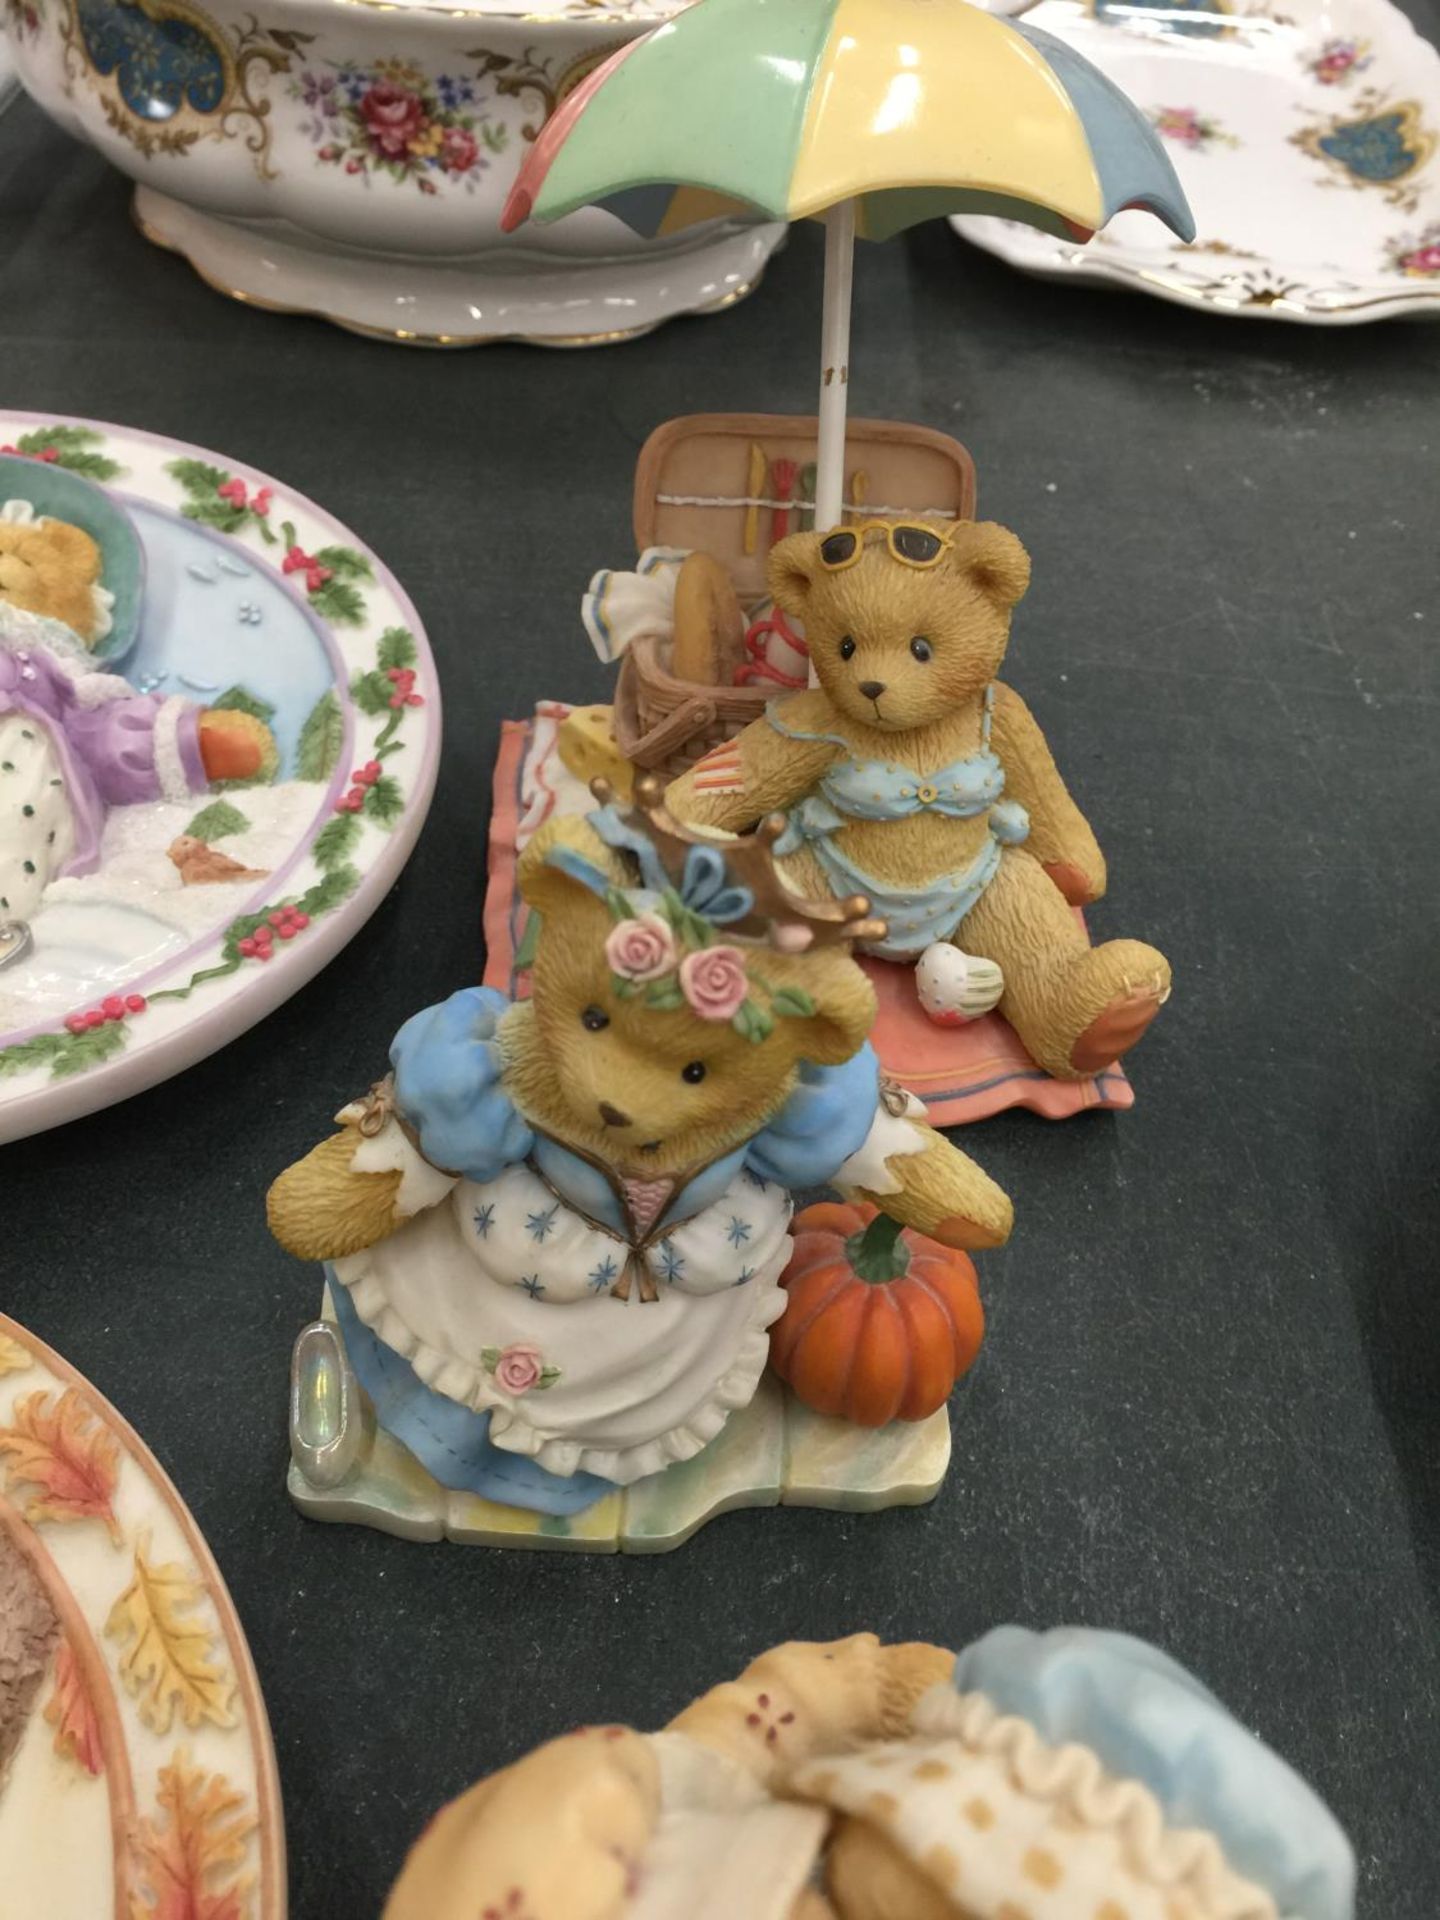 ELEVEN LIMITED EDITION CHERISHED TEDDIES PLUS FOUR CHERISHED TEDDIES LIMITED EDITION WALL PLATES - Image 5 of 6